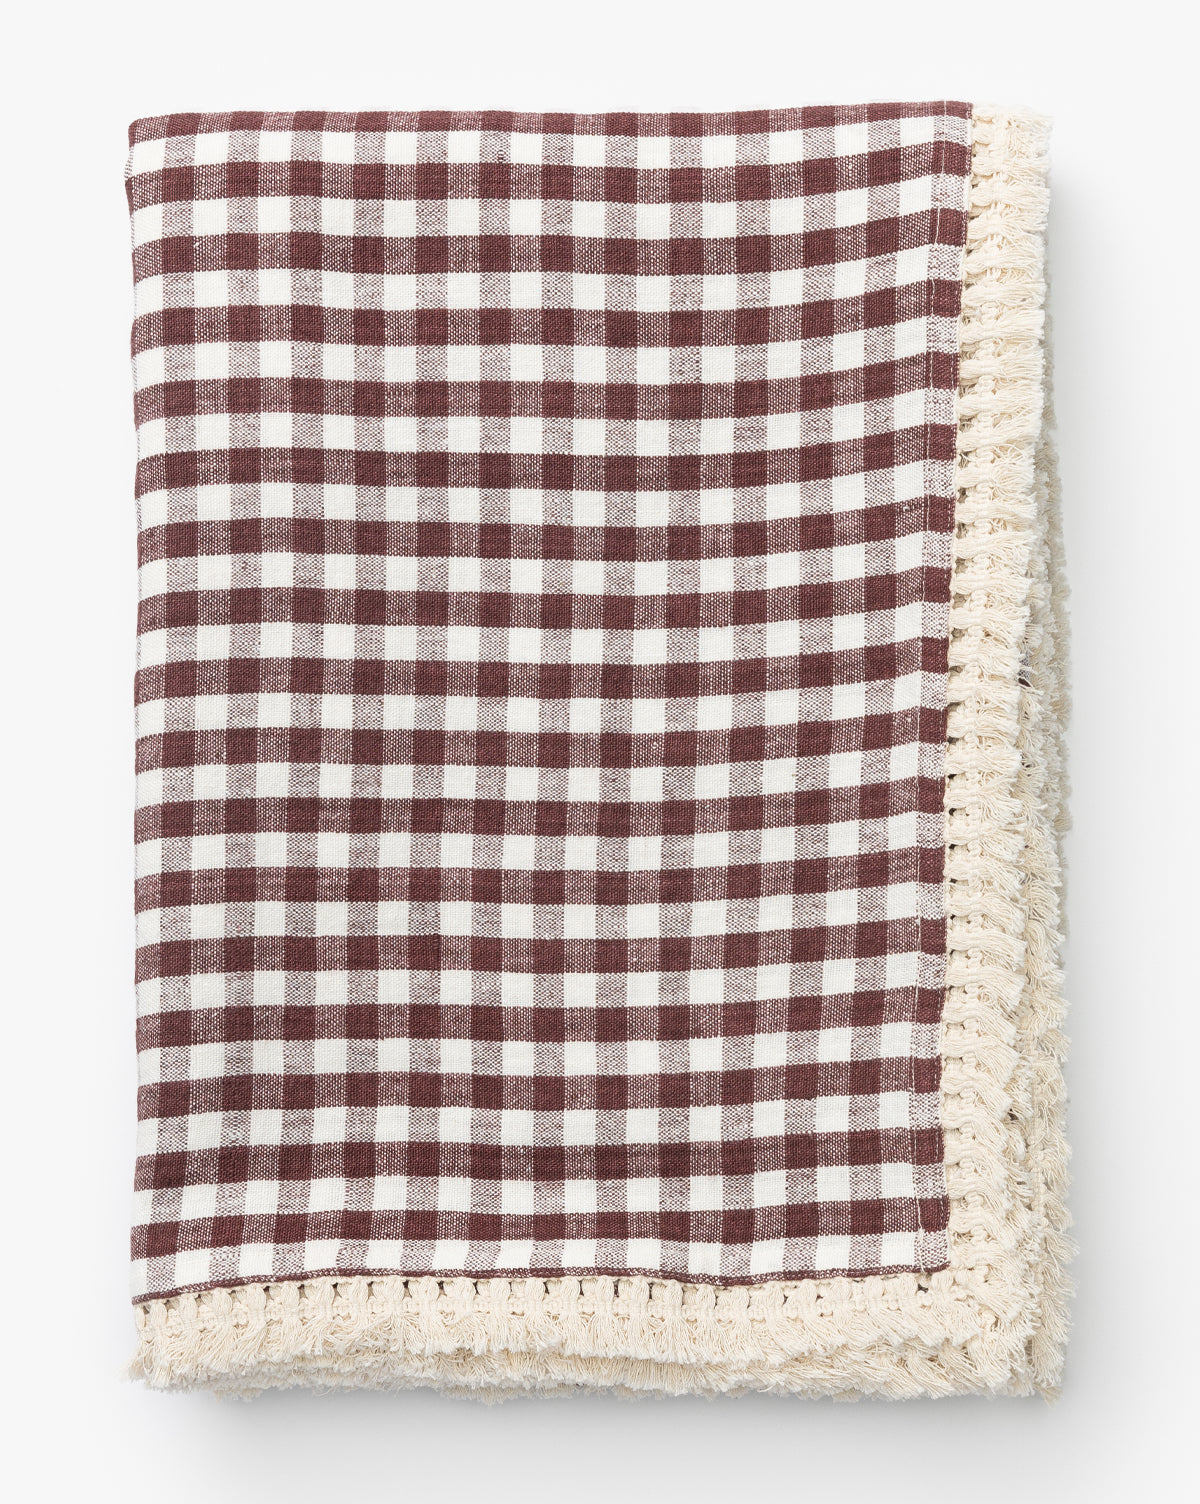 Vini Exports, Nevelyn Fringed Tablecloth